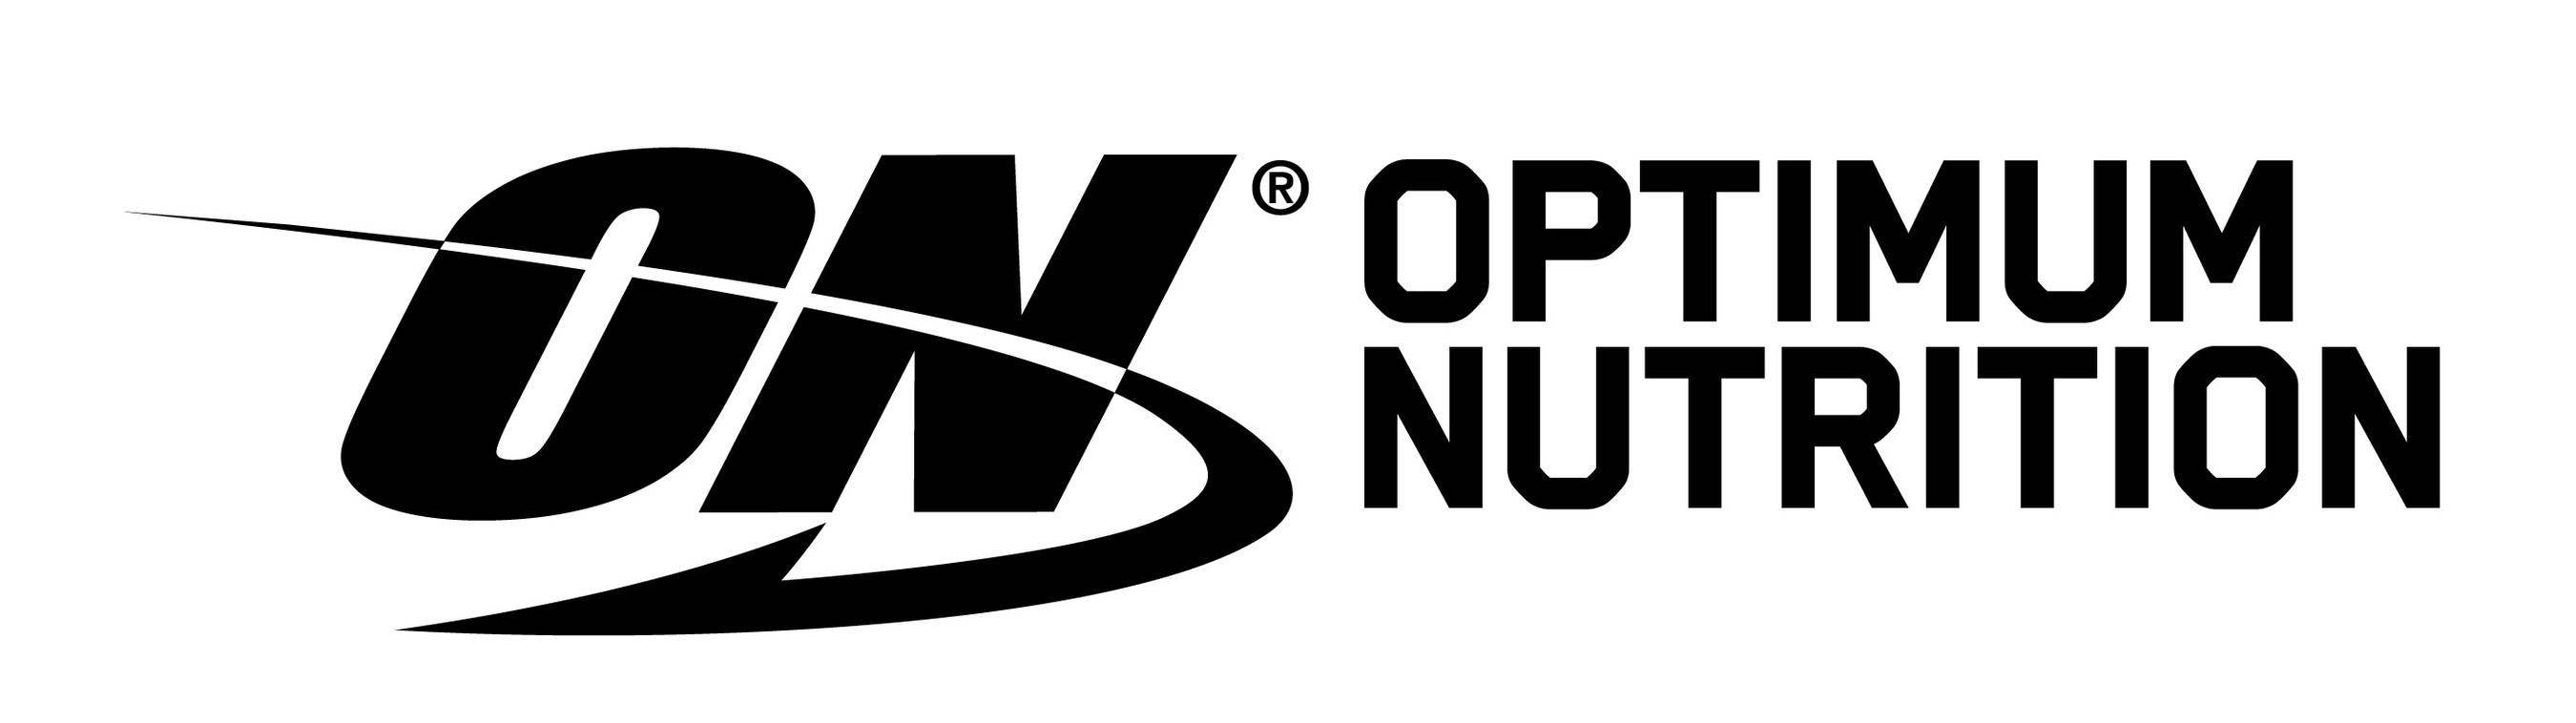 Optimum Nutrition Enters Distribution Agreement With Kalil Bottling Company